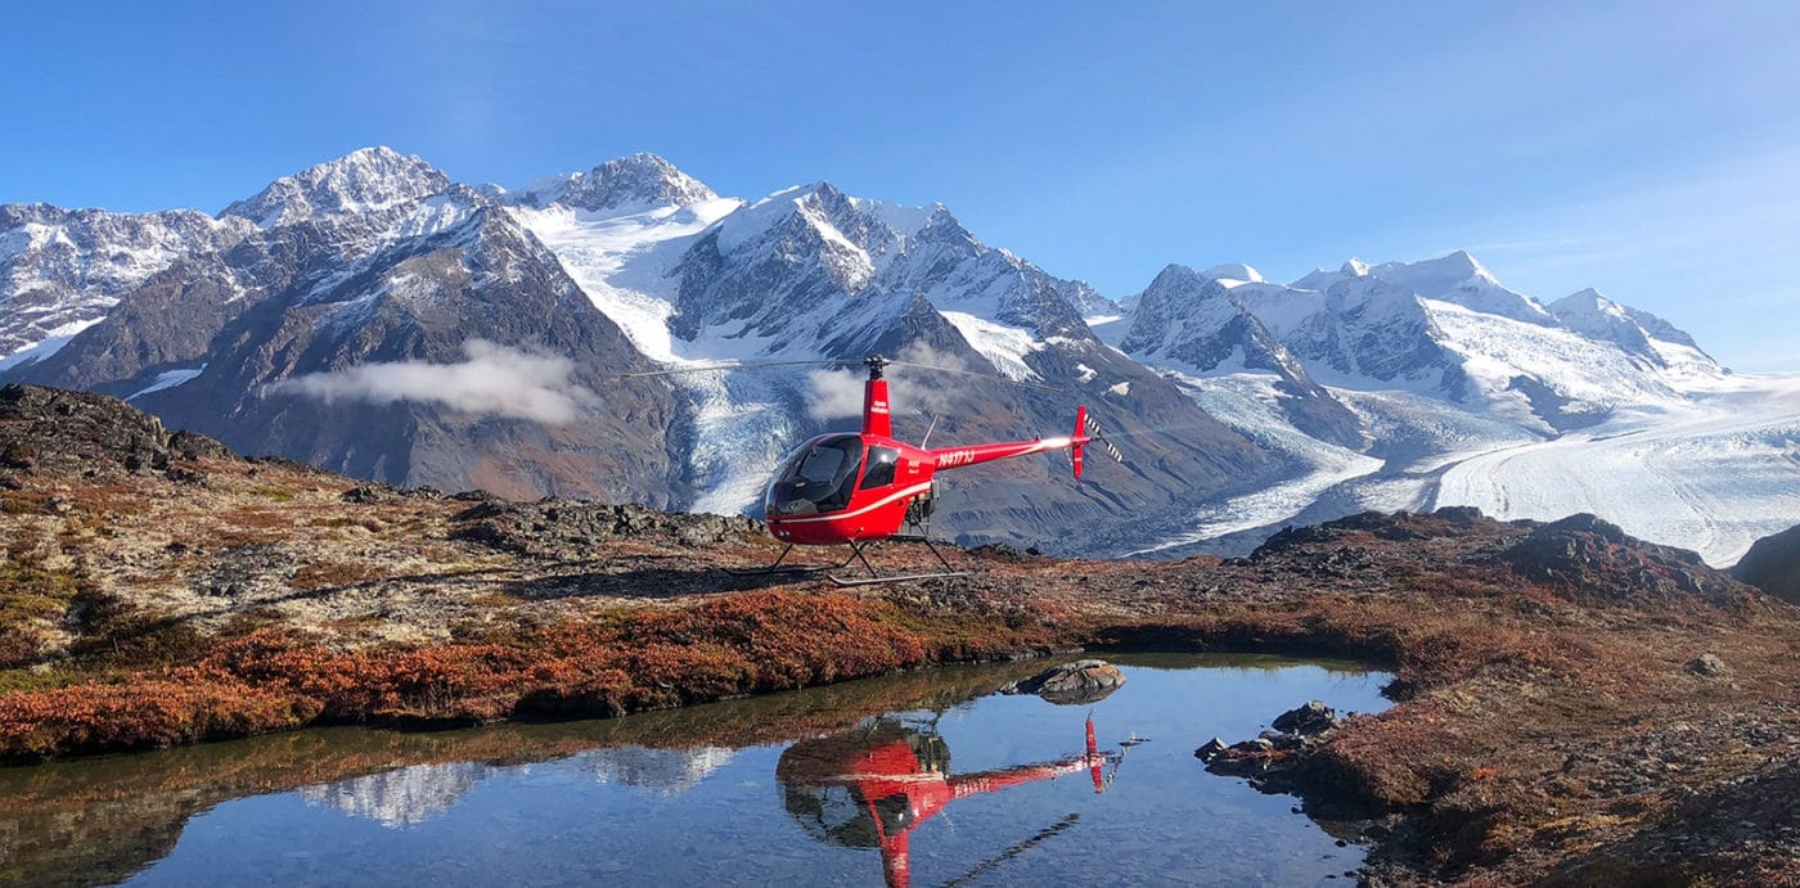 Helicopter resting on tundra next to lake with Alaskan glacier and mountains in the background.